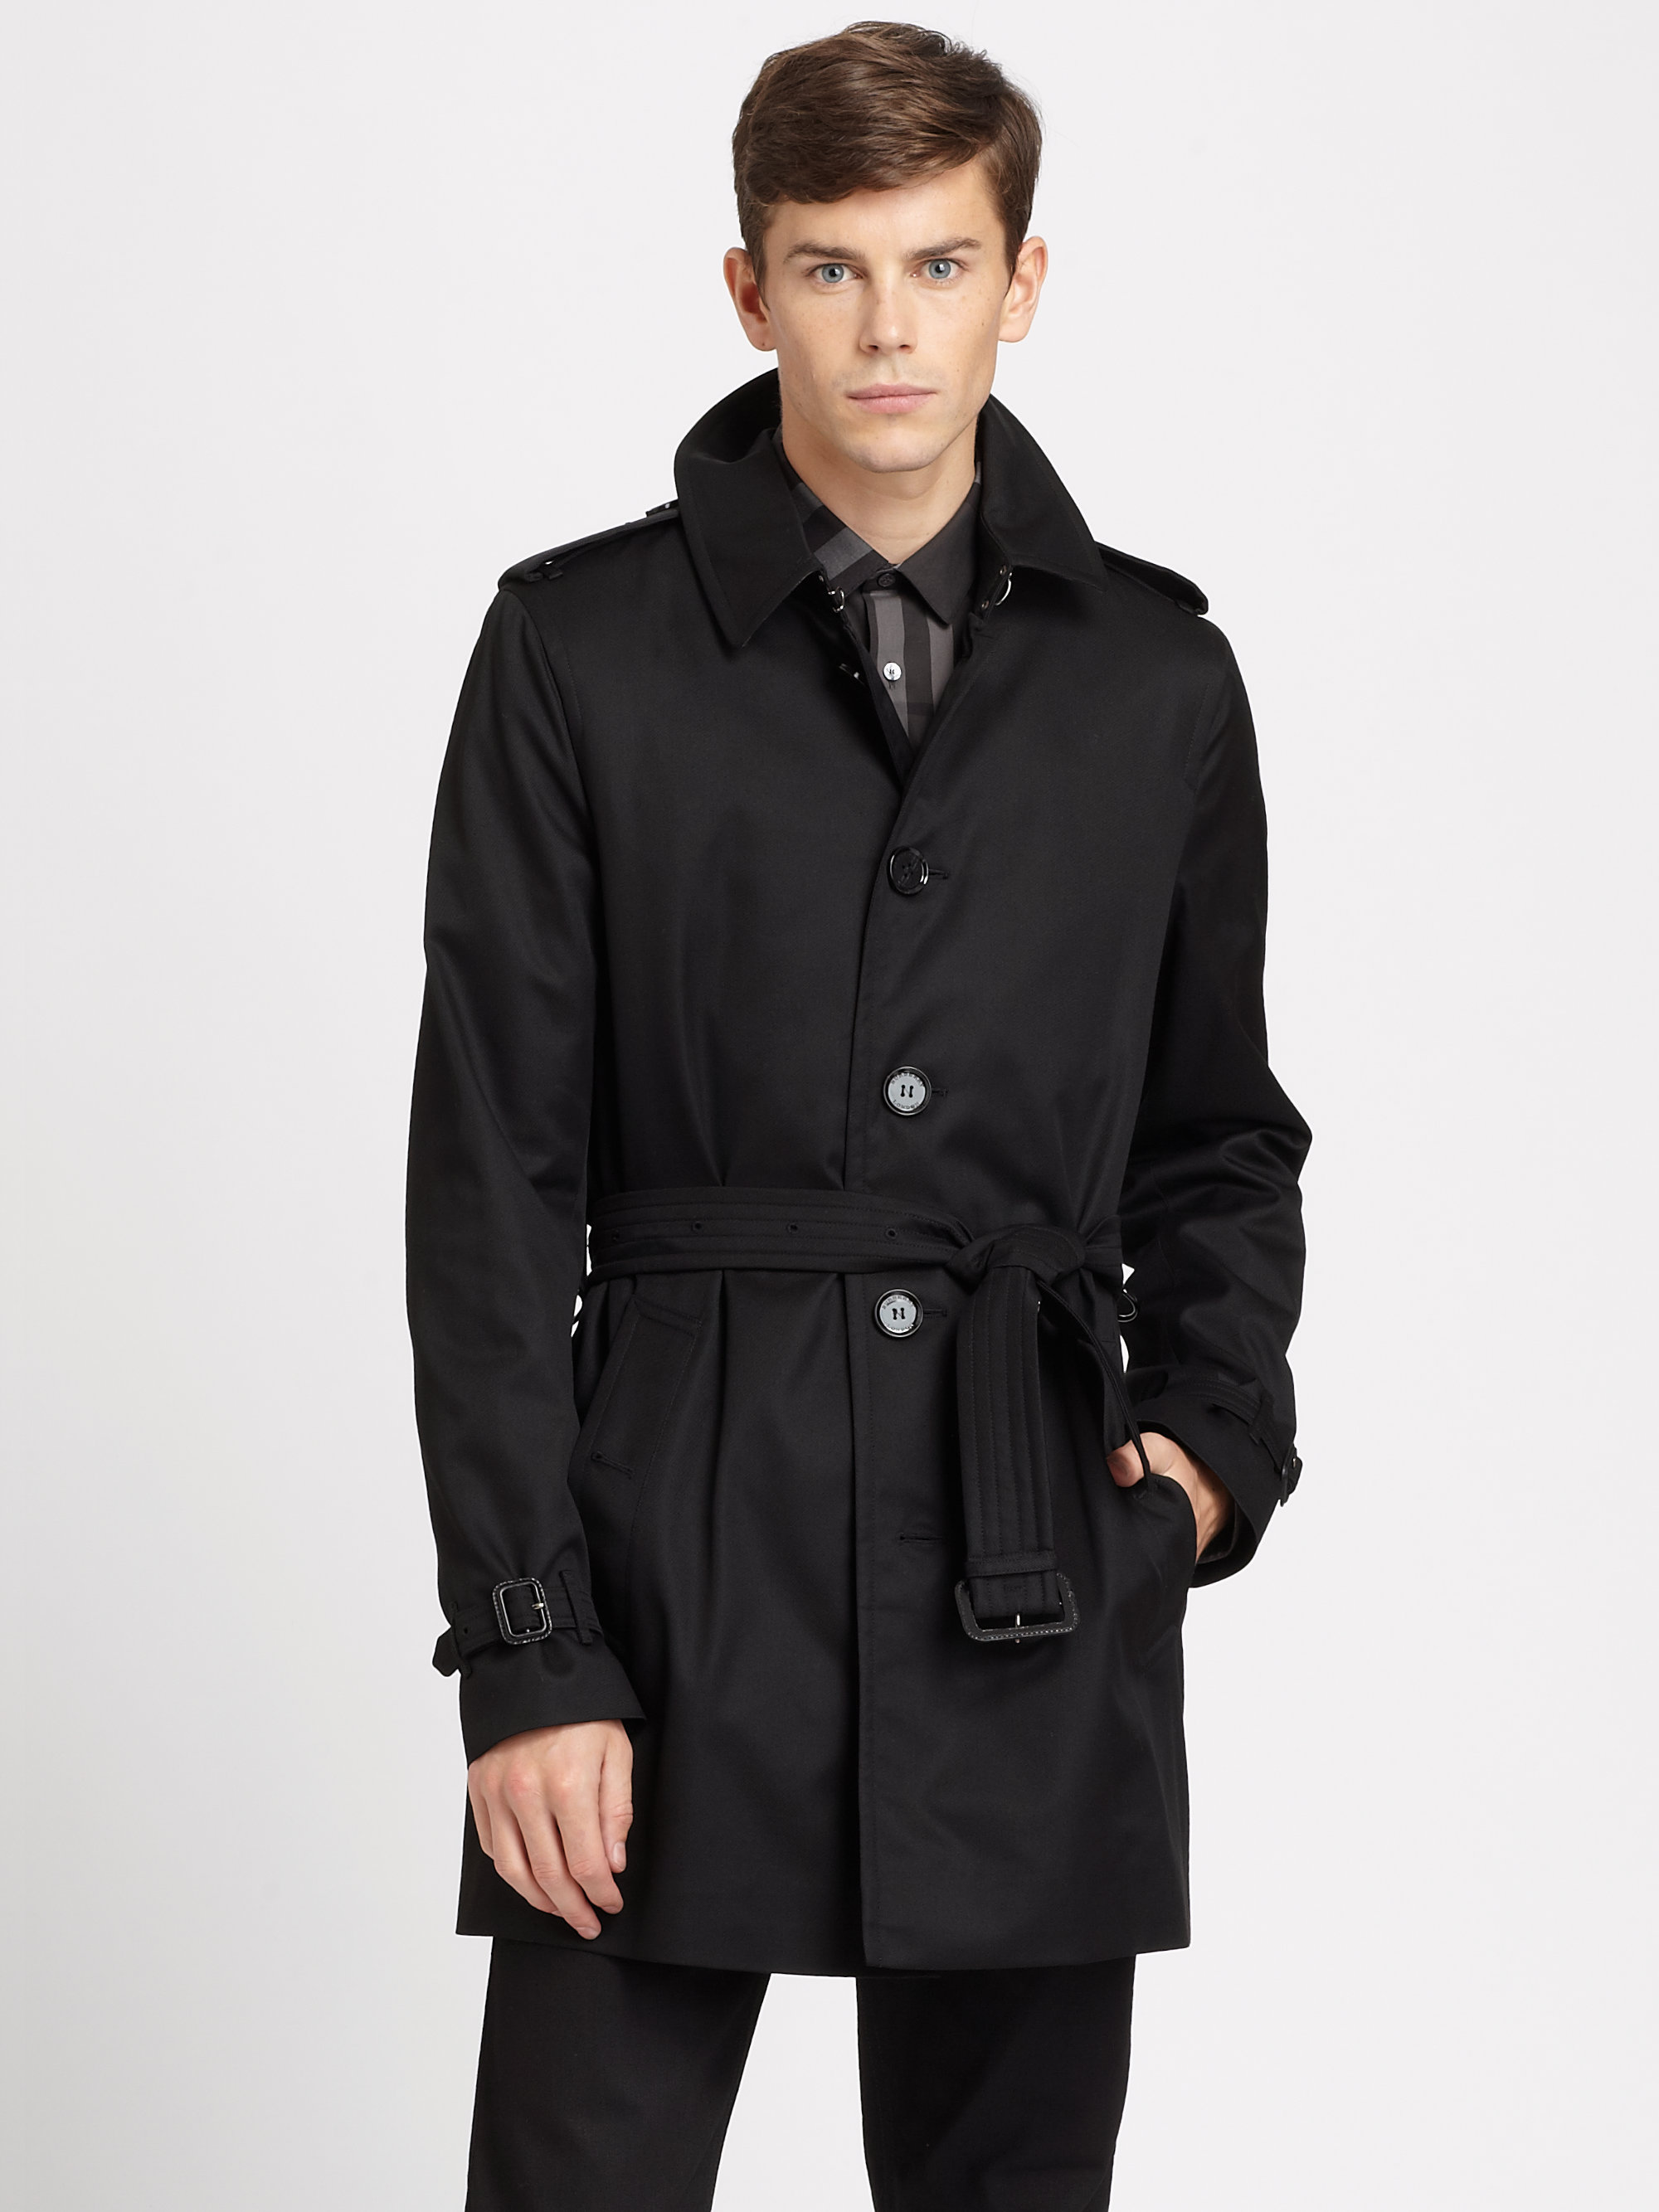 Lyst - Burberry Britton Single Breasted Trench Coat in Black for Men